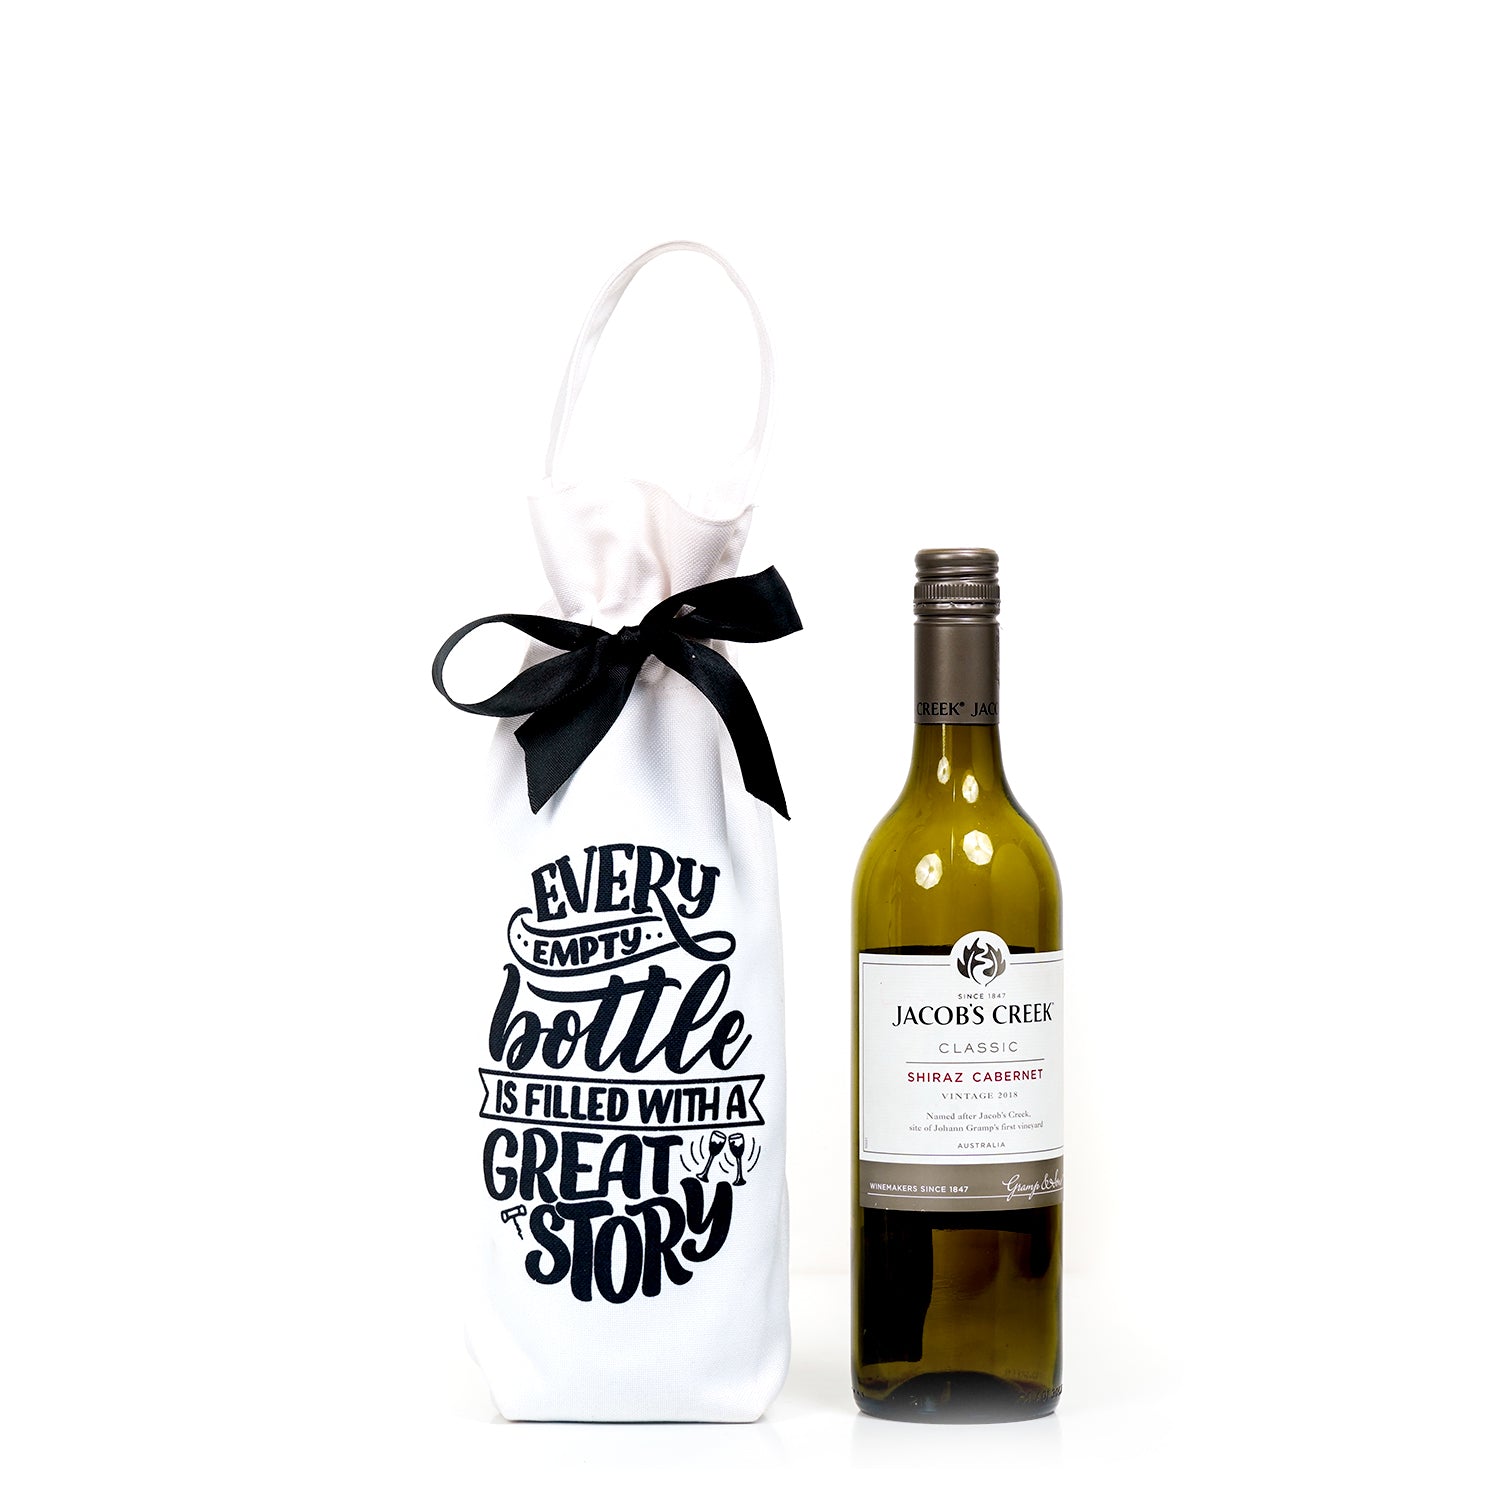 5 DIFFERENT WAYS TO WRAP A BOTTLE OF WINE THIS CHRISTMAS